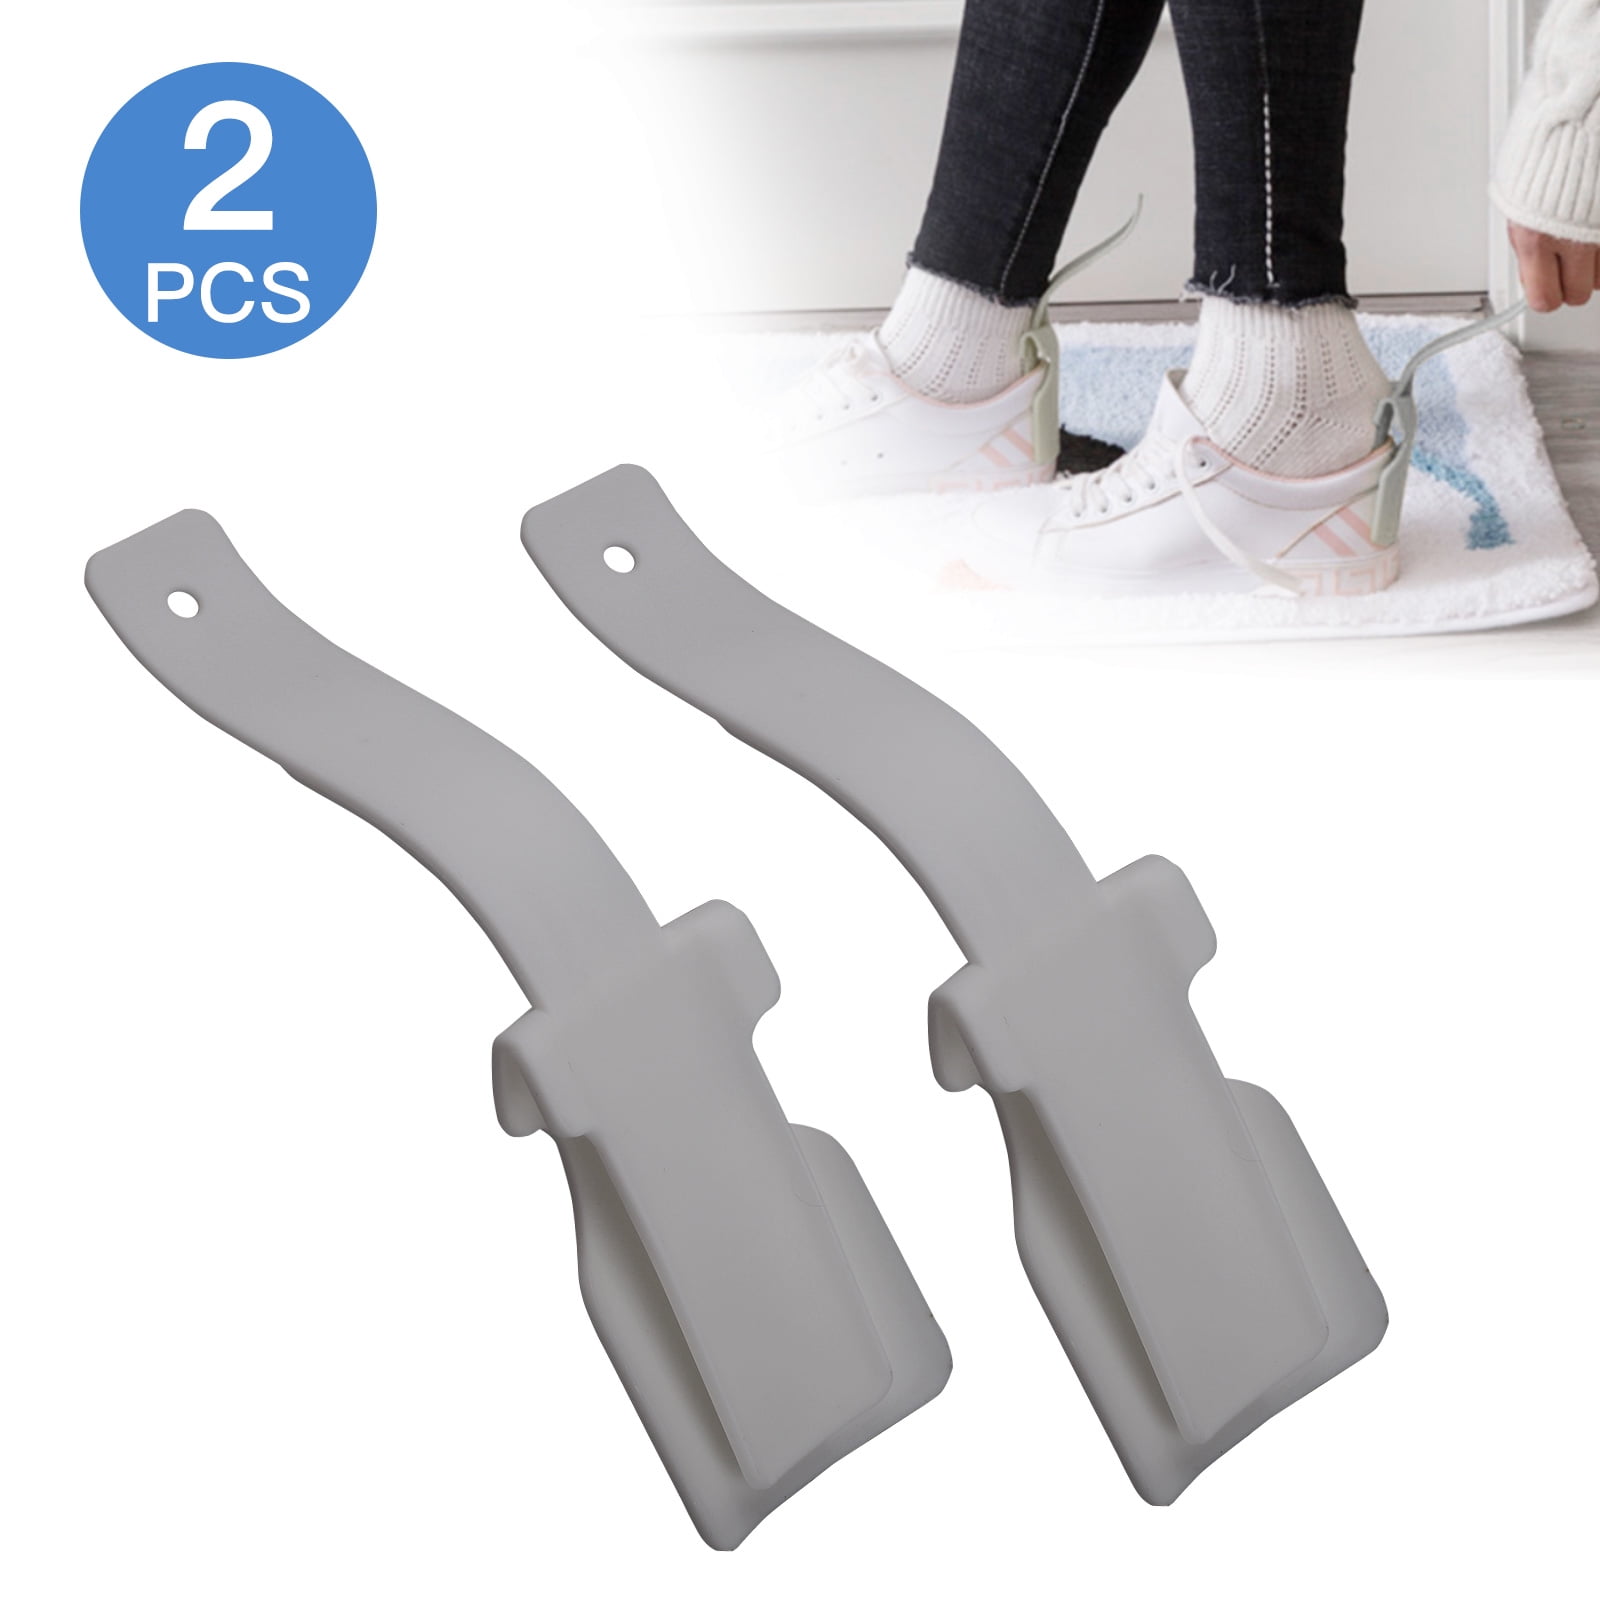 HIBRO Adhesive Wall Hangers Peel And Stick 2Pcs Lazy Shoe Helper Fits All  Shoes Thread Tube Small Shoes Pull Belt Leather Shoes 